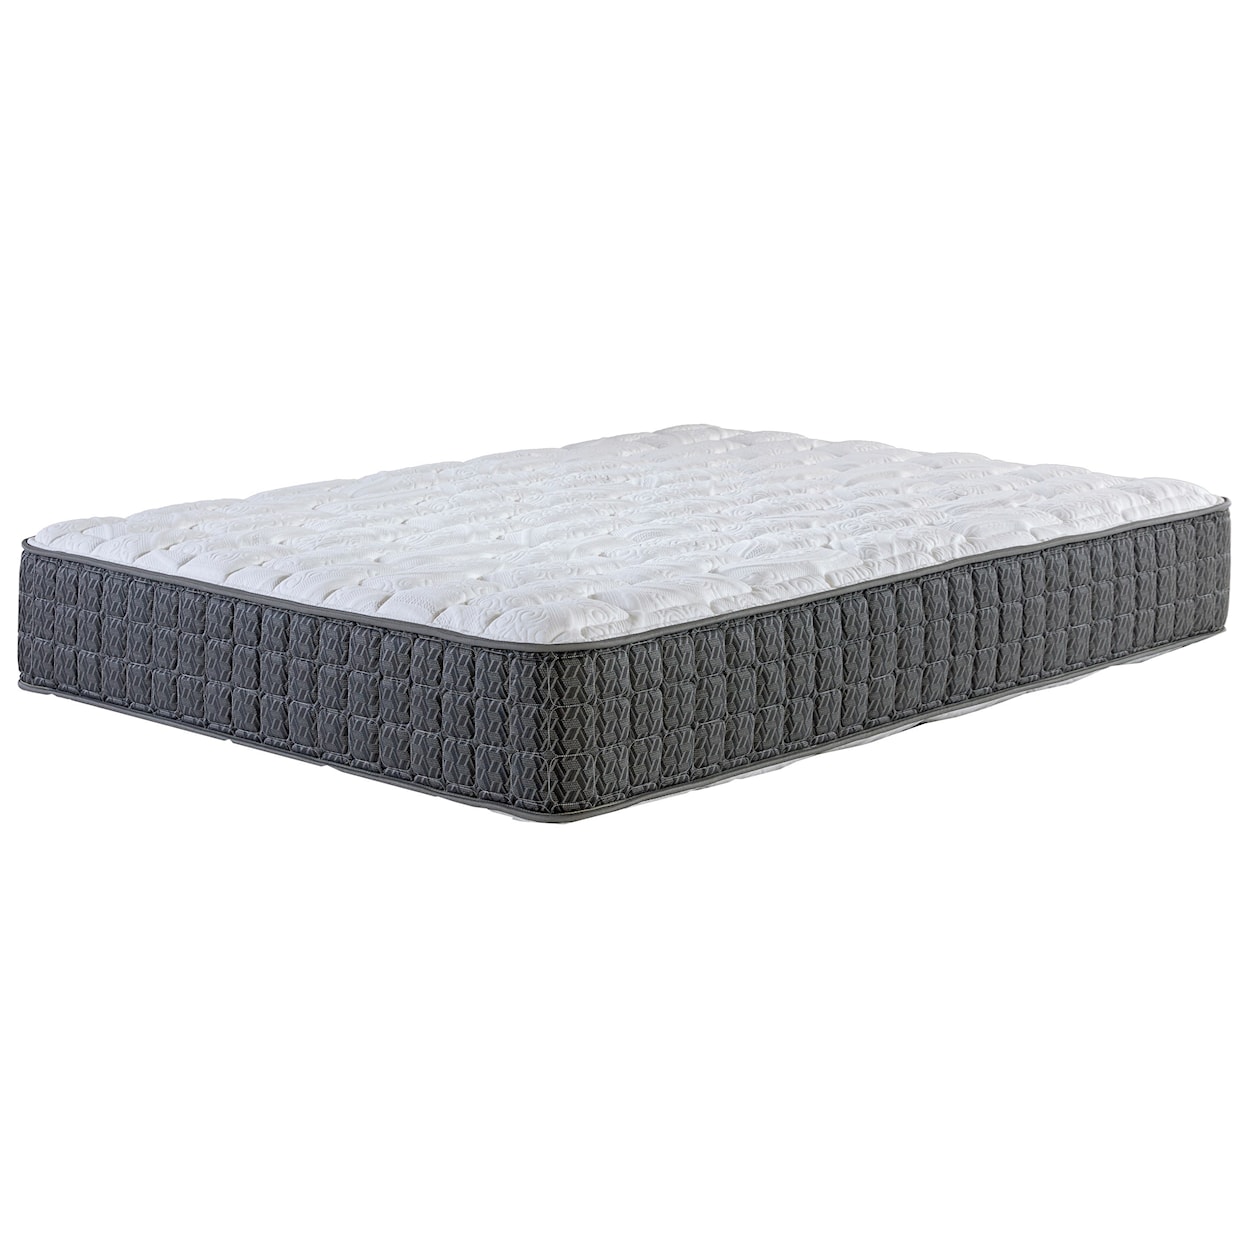 Corsicana Rossington Firm Full Firm Two Sided Mattress